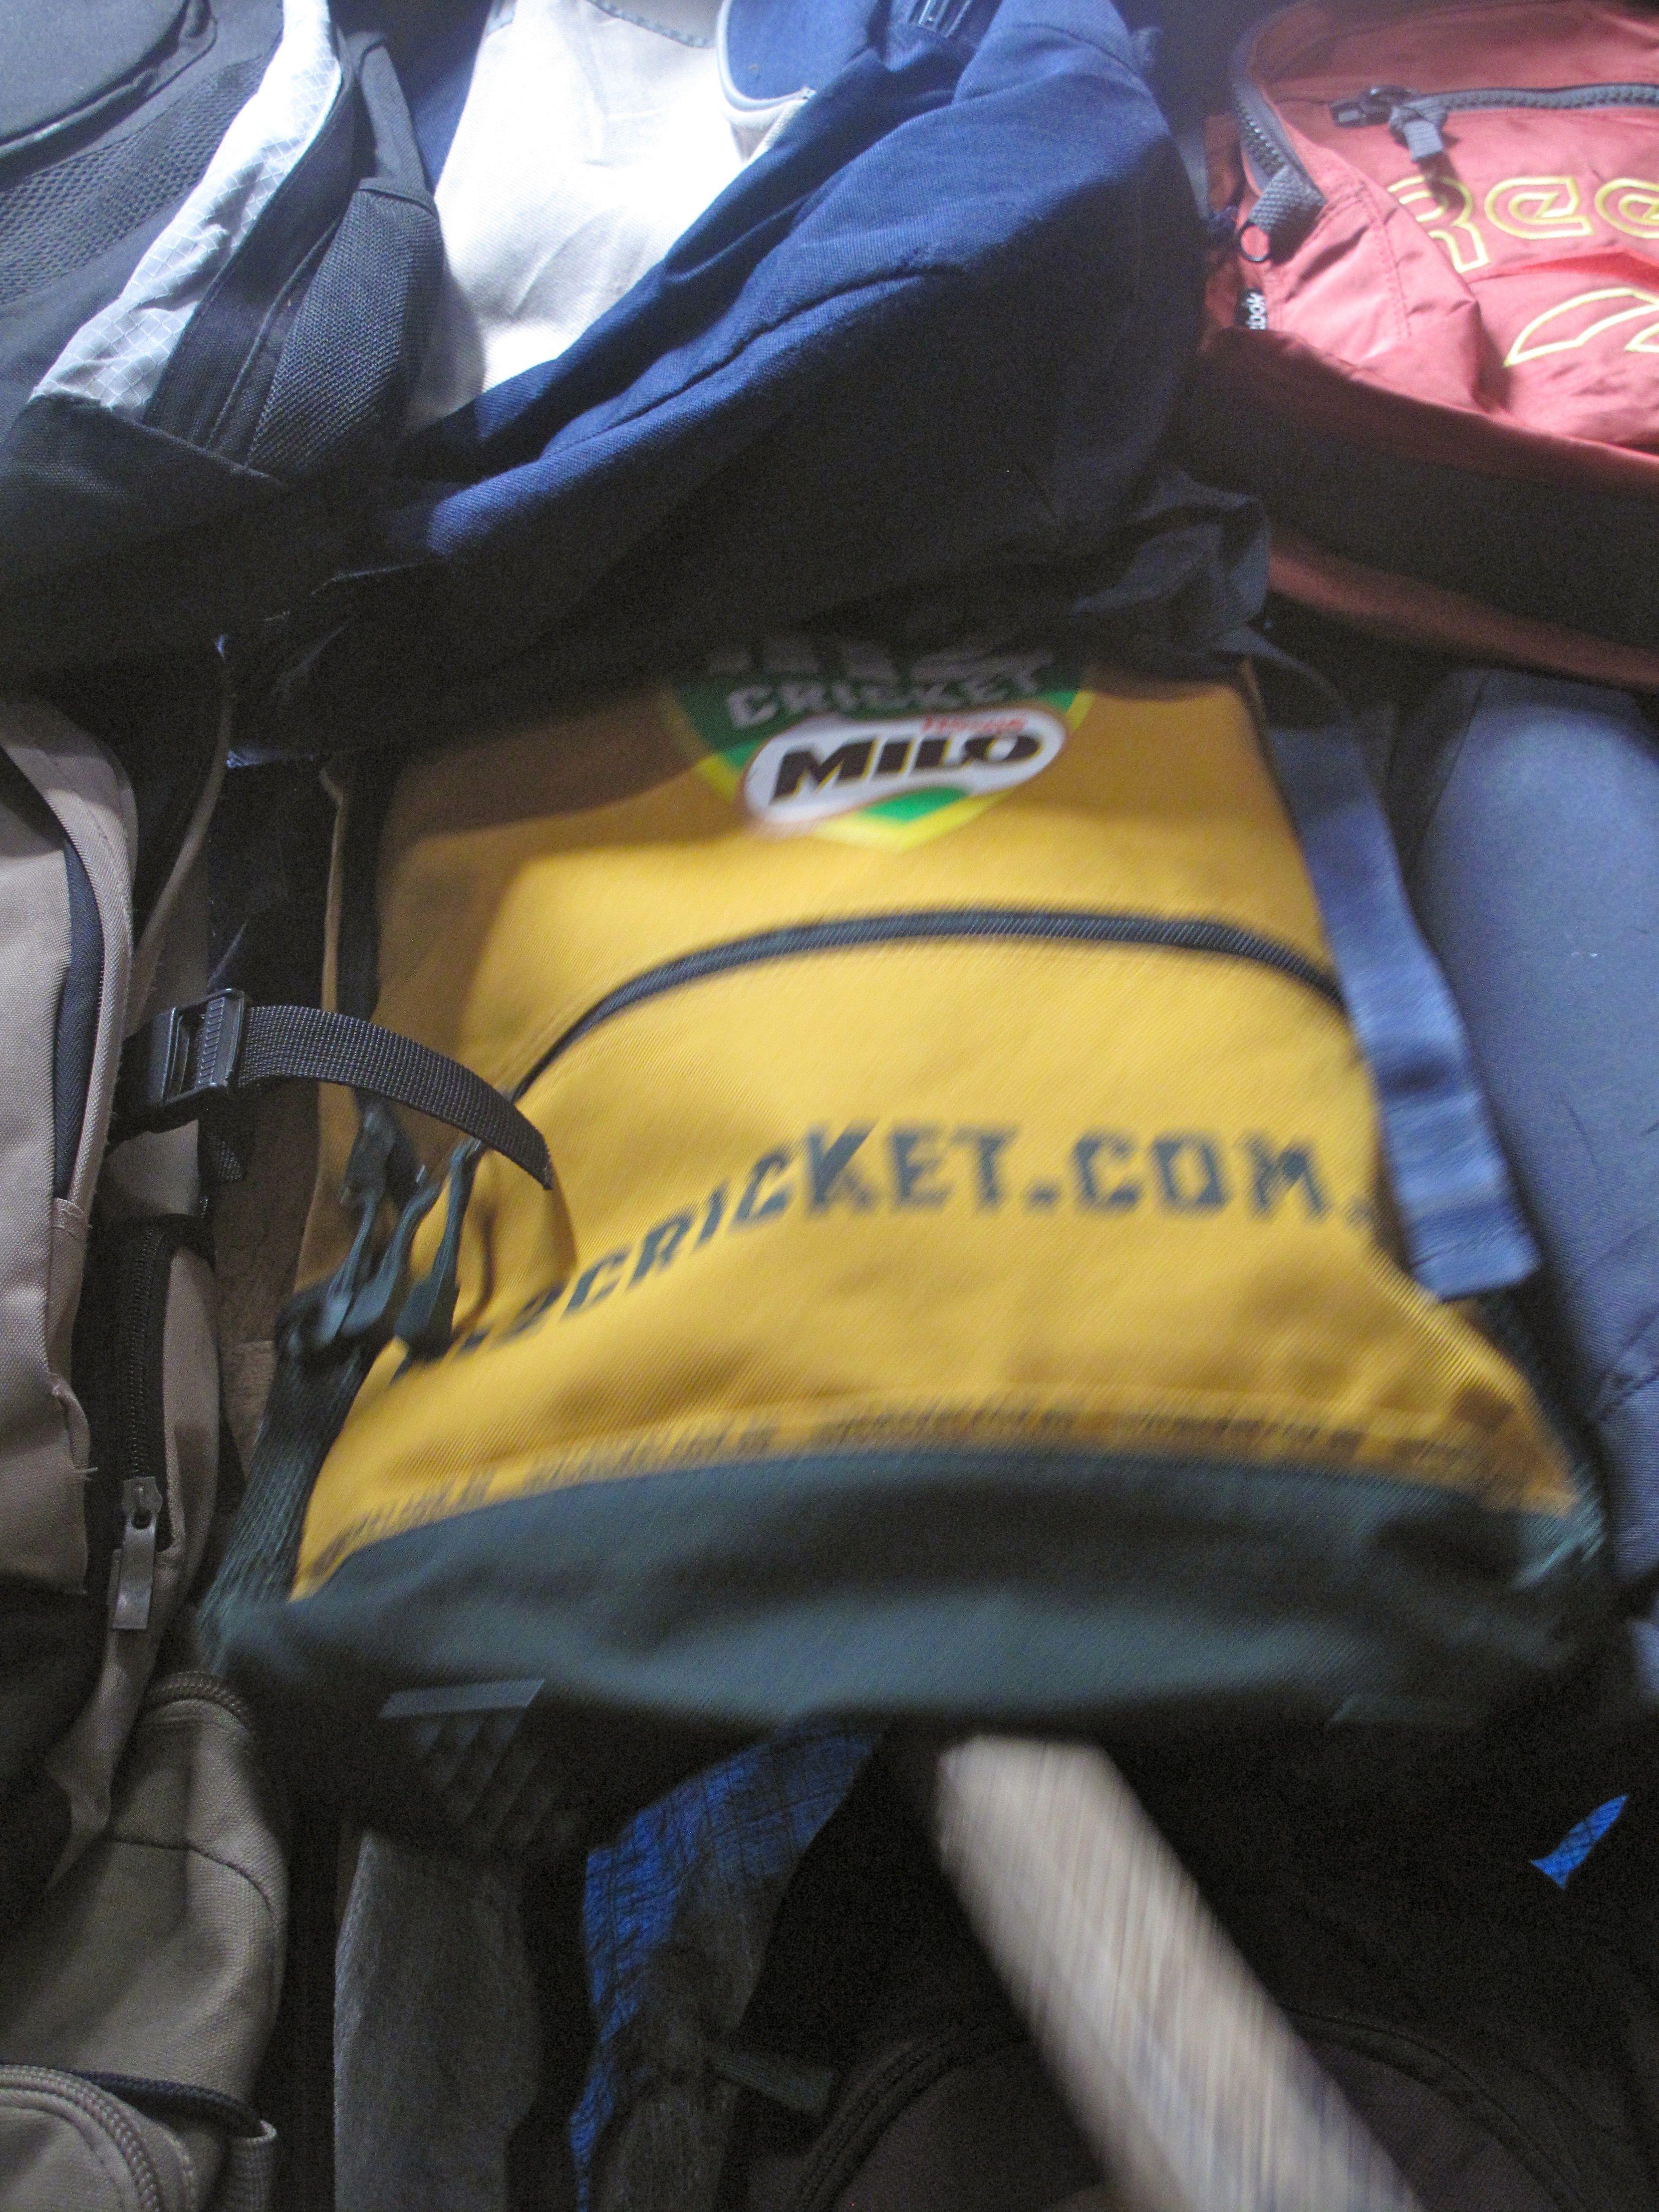 Australian Backpack Logo - But wait, there's more! An Australian cricket backpack with the Milo ...